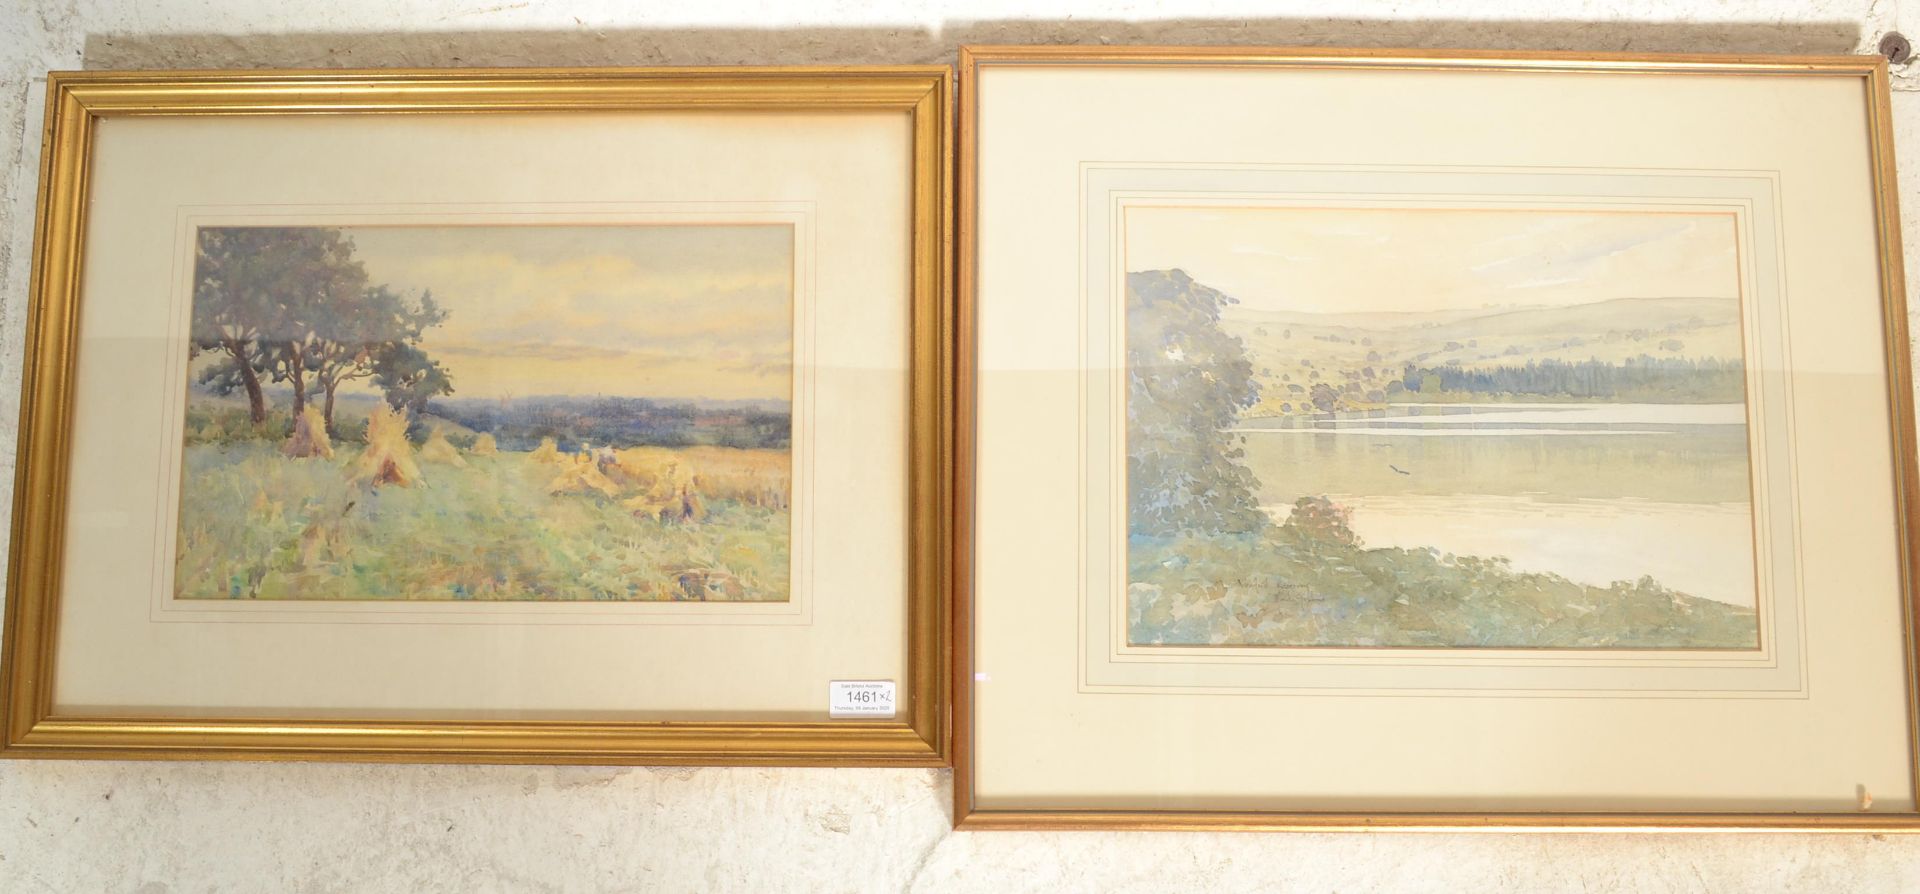 Mark Gibbins - A 20th Century watercolour painting on paper depicting Venford Reservoir with hills